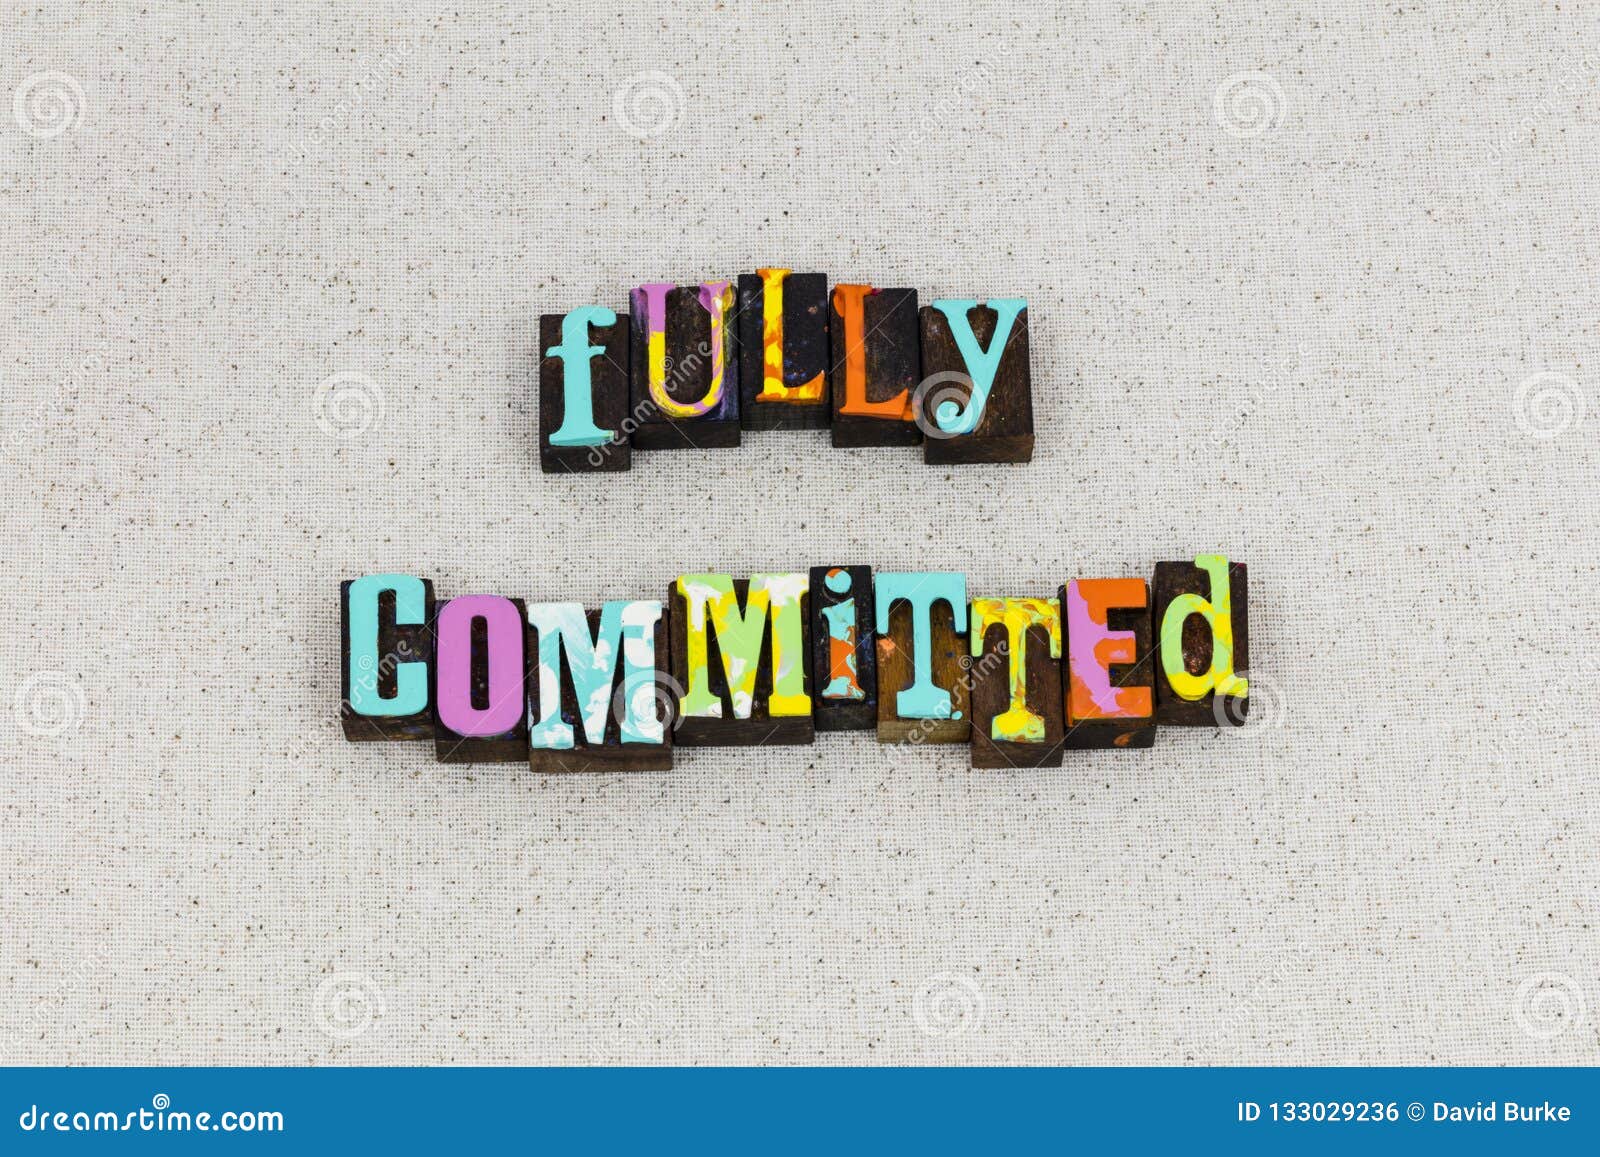 full committed determination commitment responsibility accountability values action